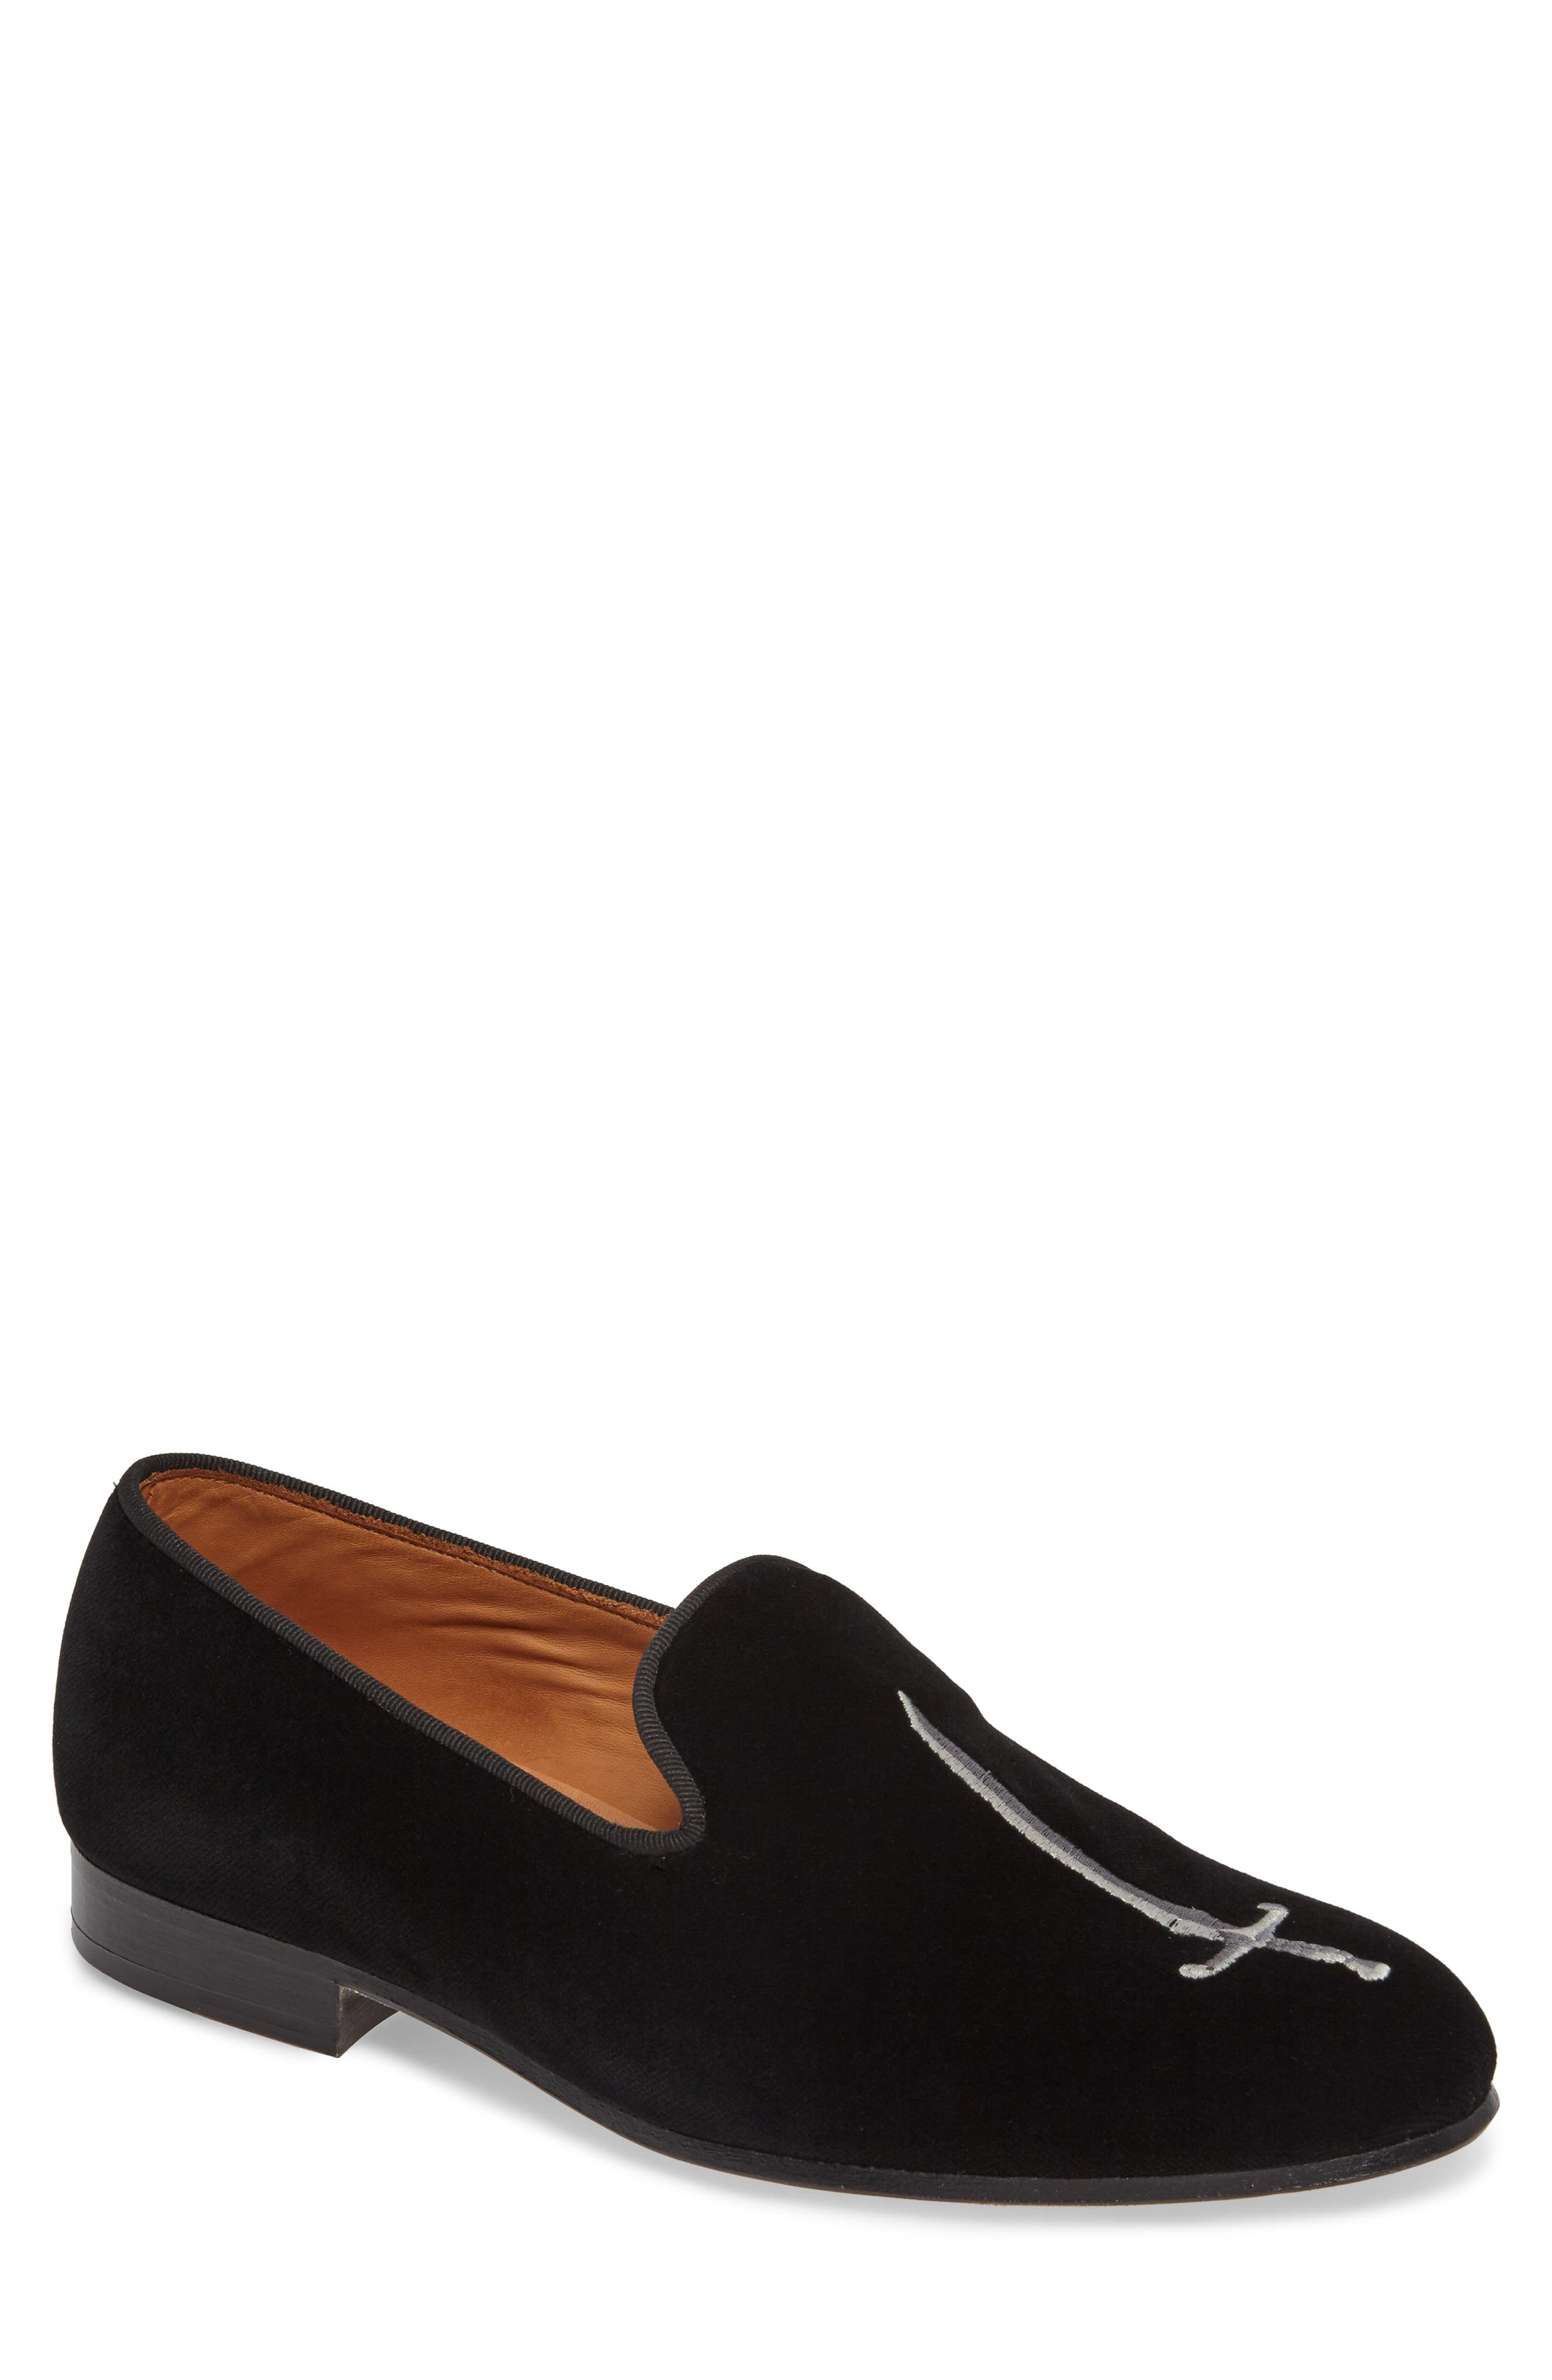 vince camuto mens loafers